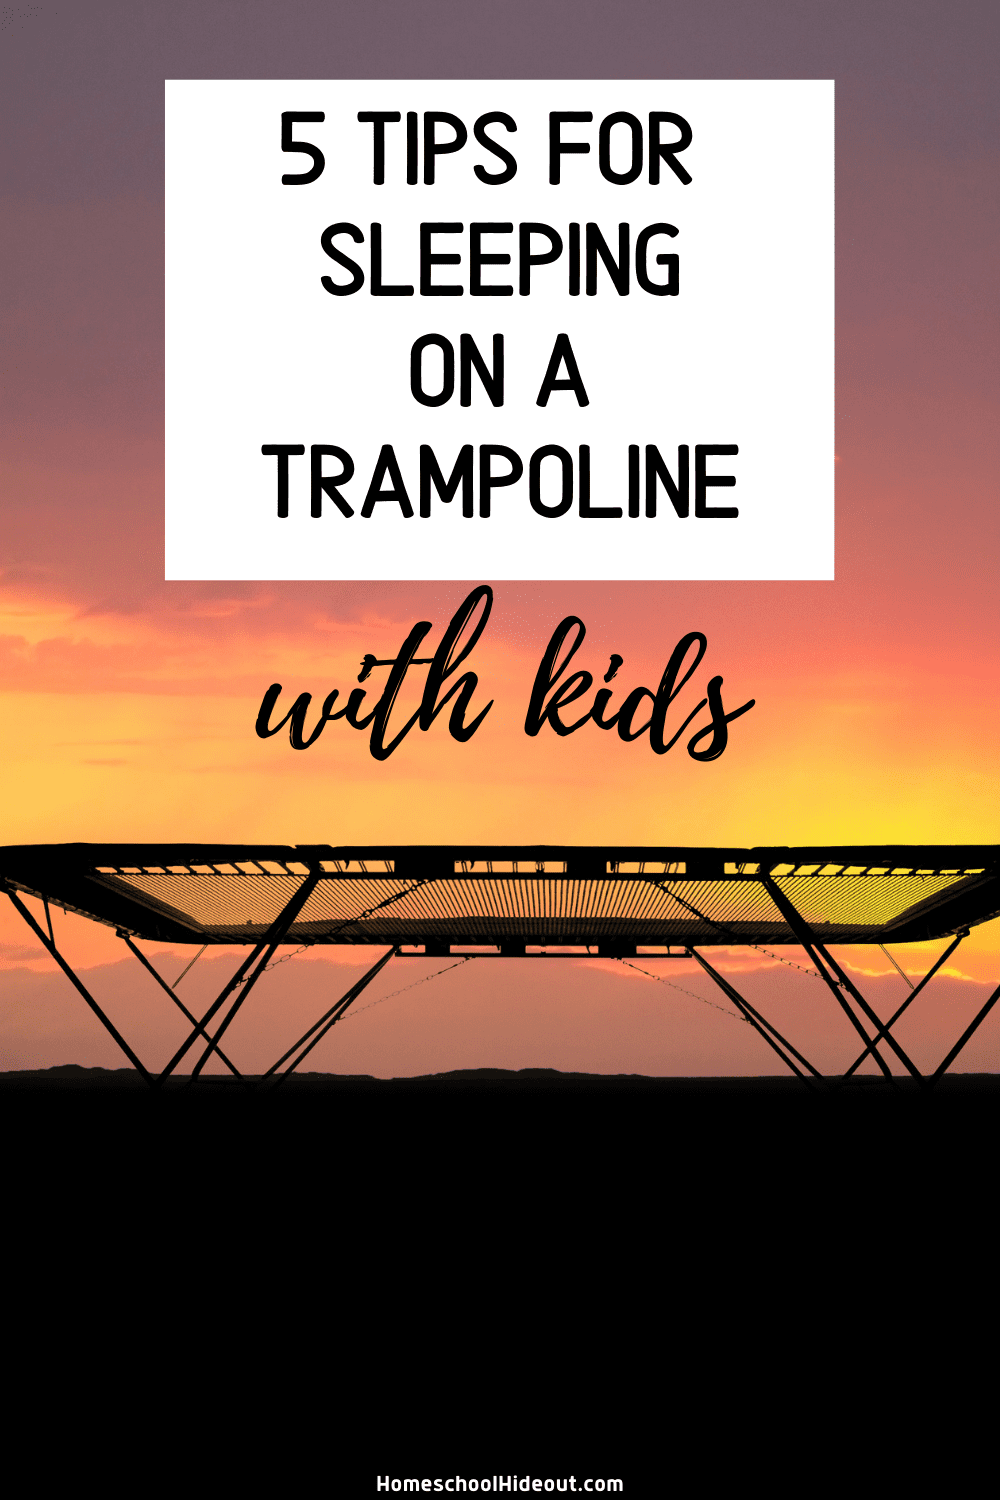 Sleeping on the trampoline is fun and FREE! Love these ideas, especially #4!